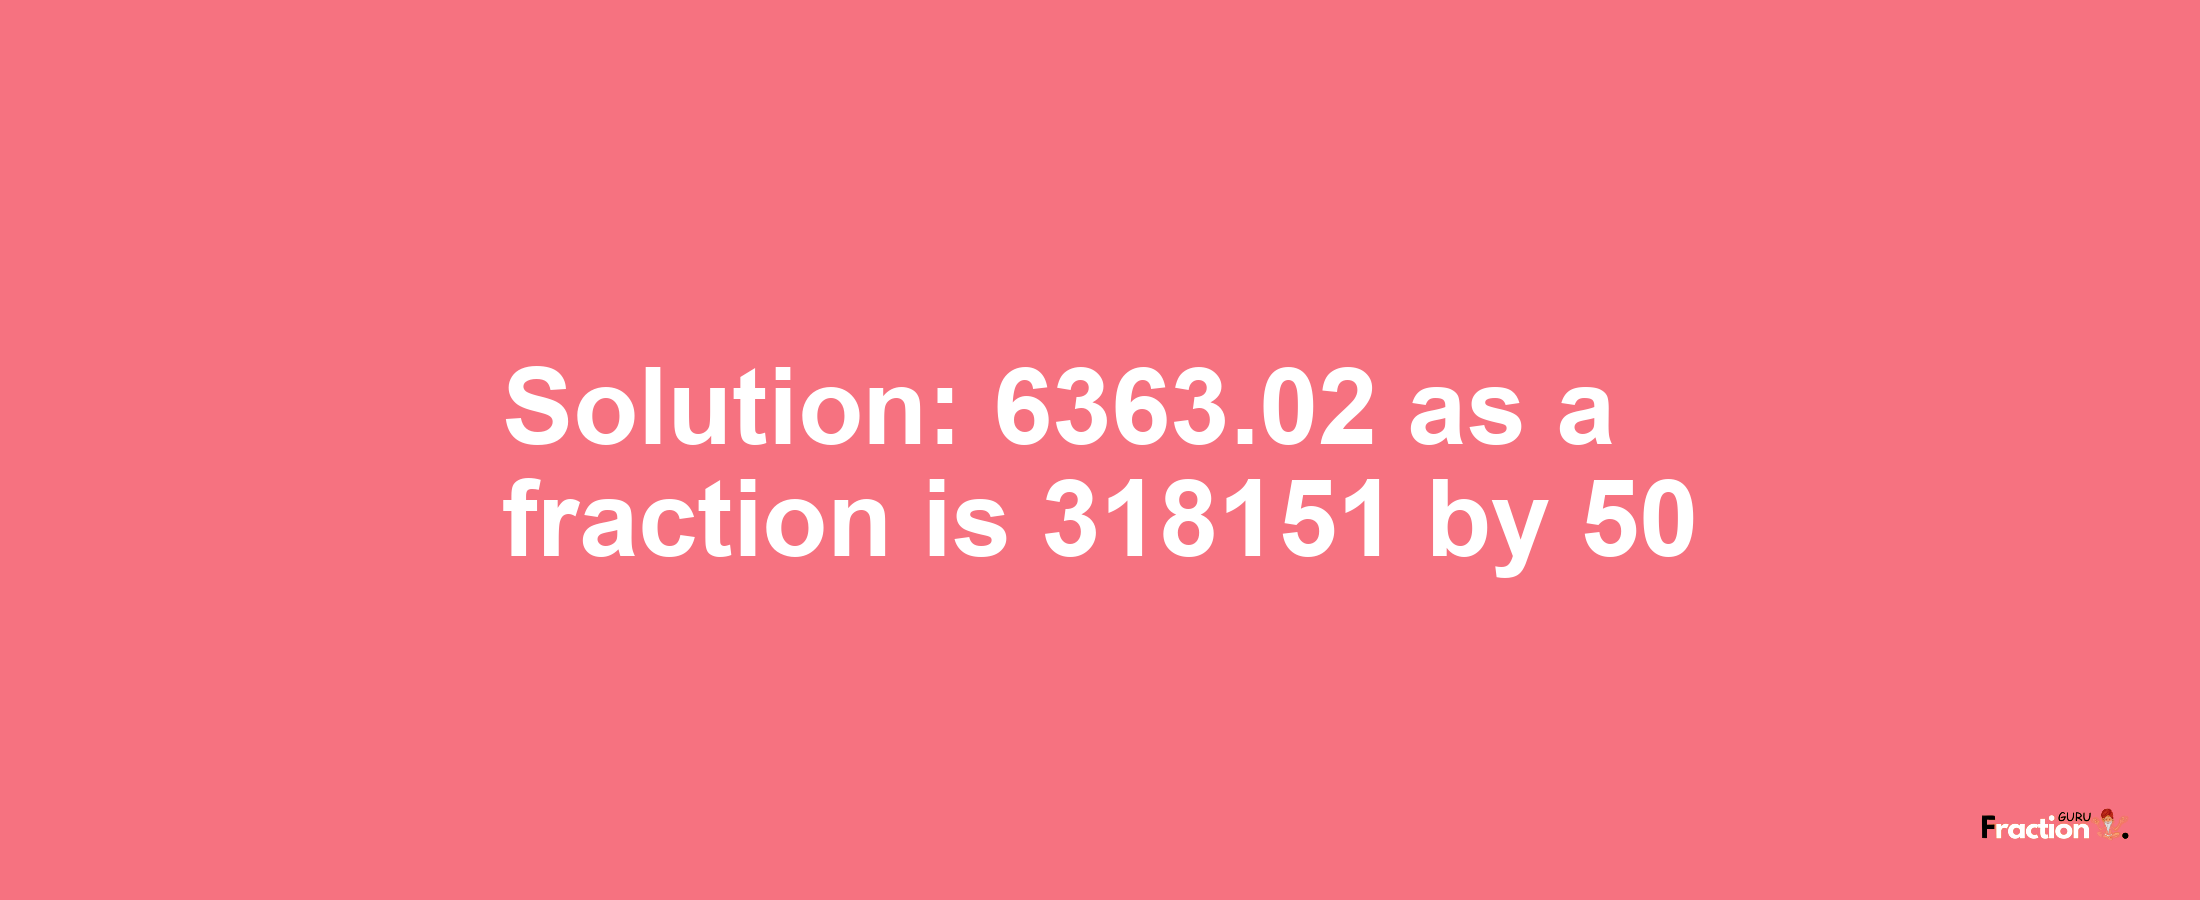 Solution:6363.02 as a fraction is 318151/50